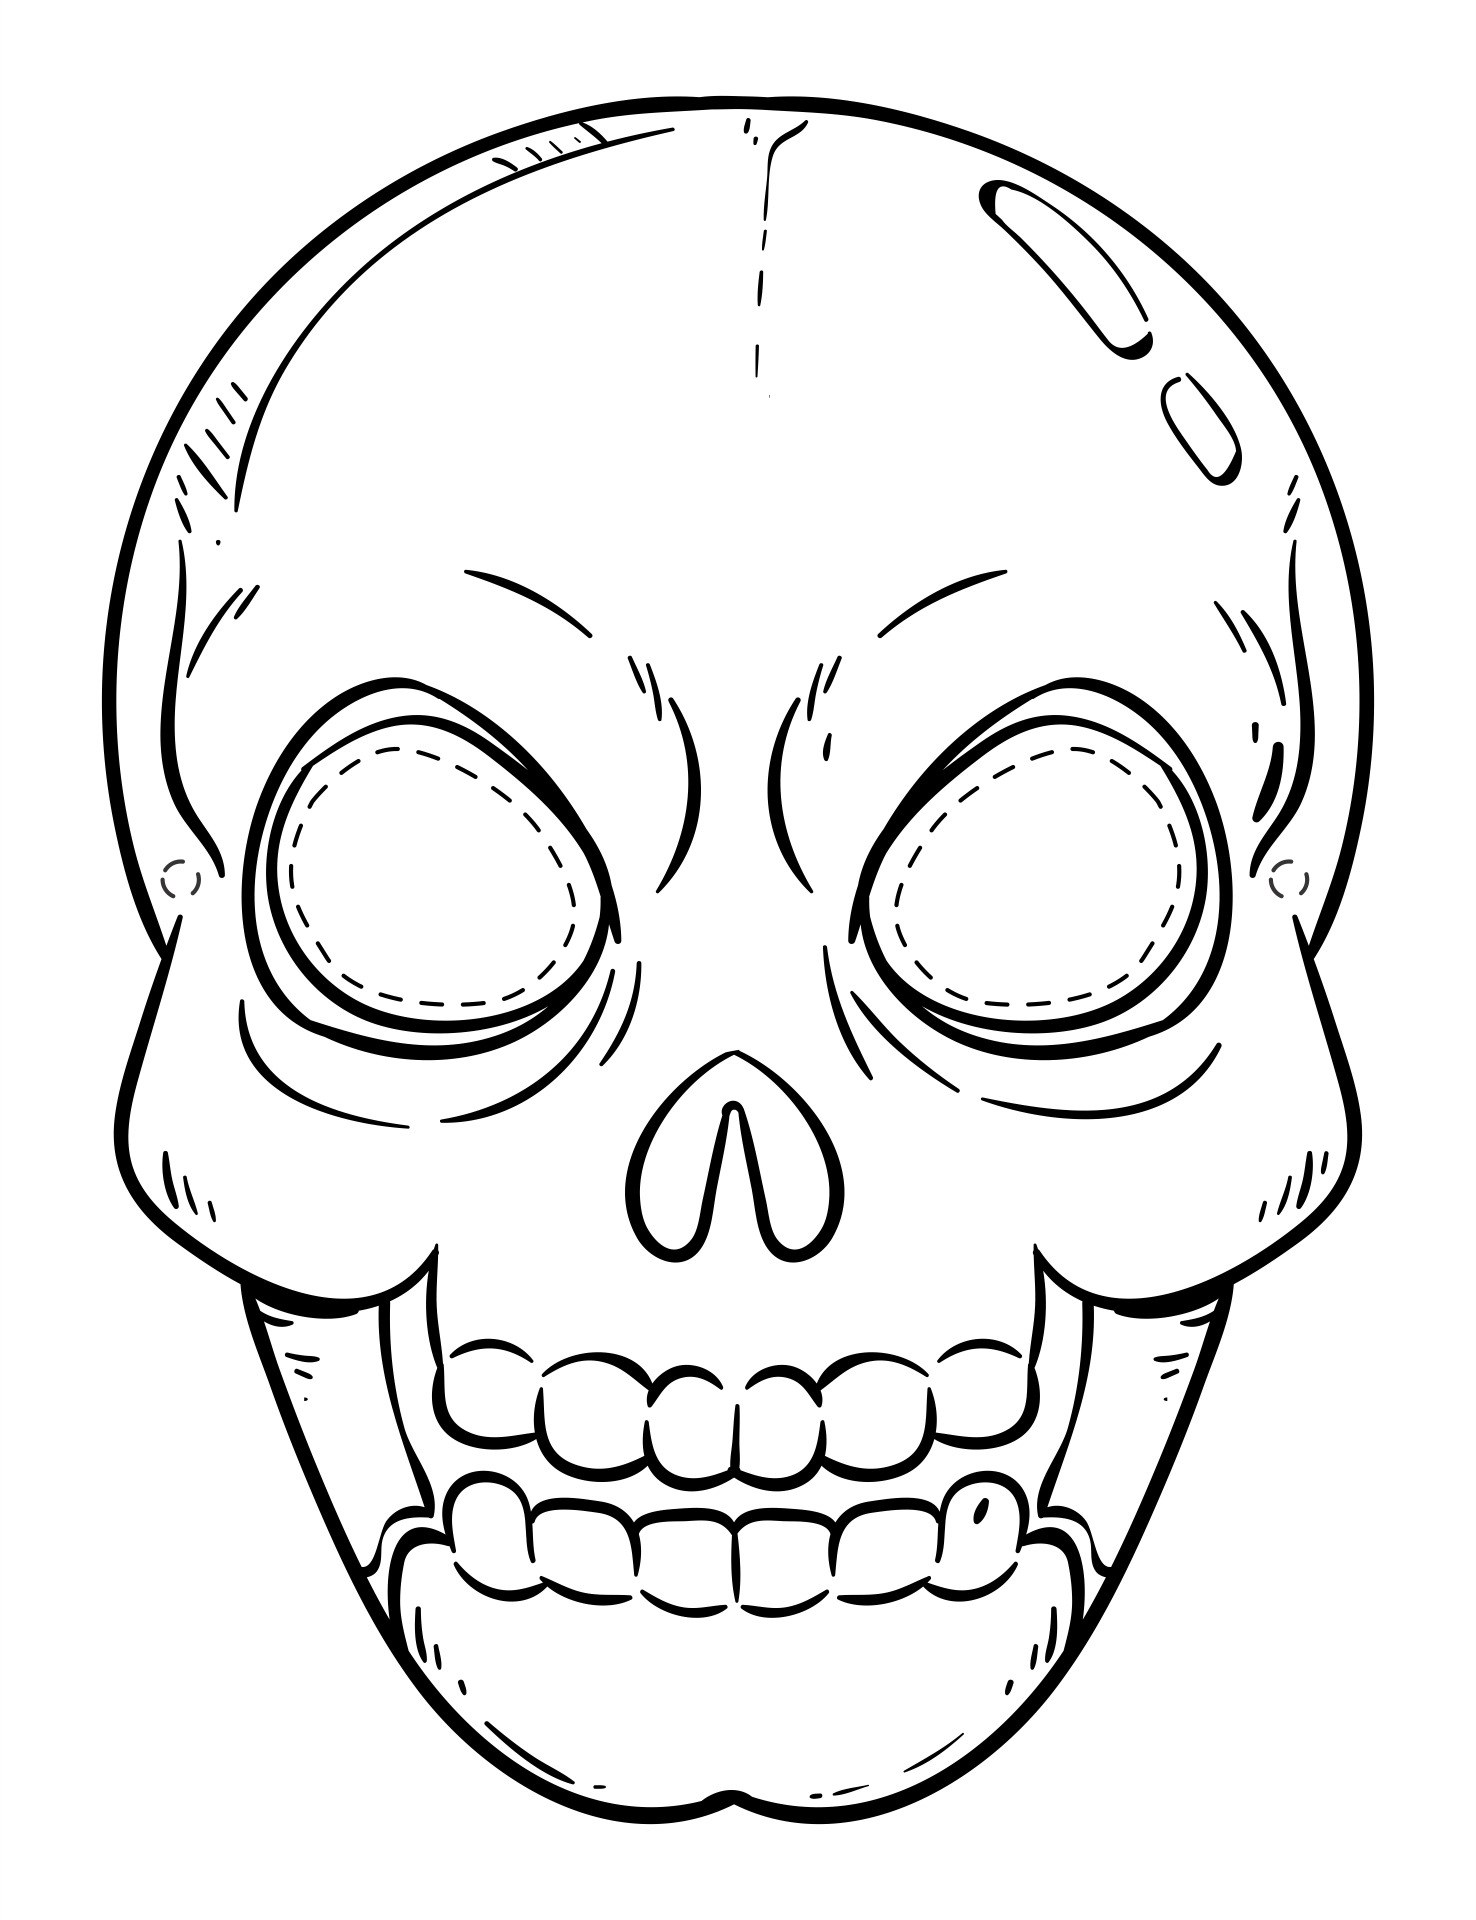 8-best-images-of-printable-halloween-masks-to-color-printable